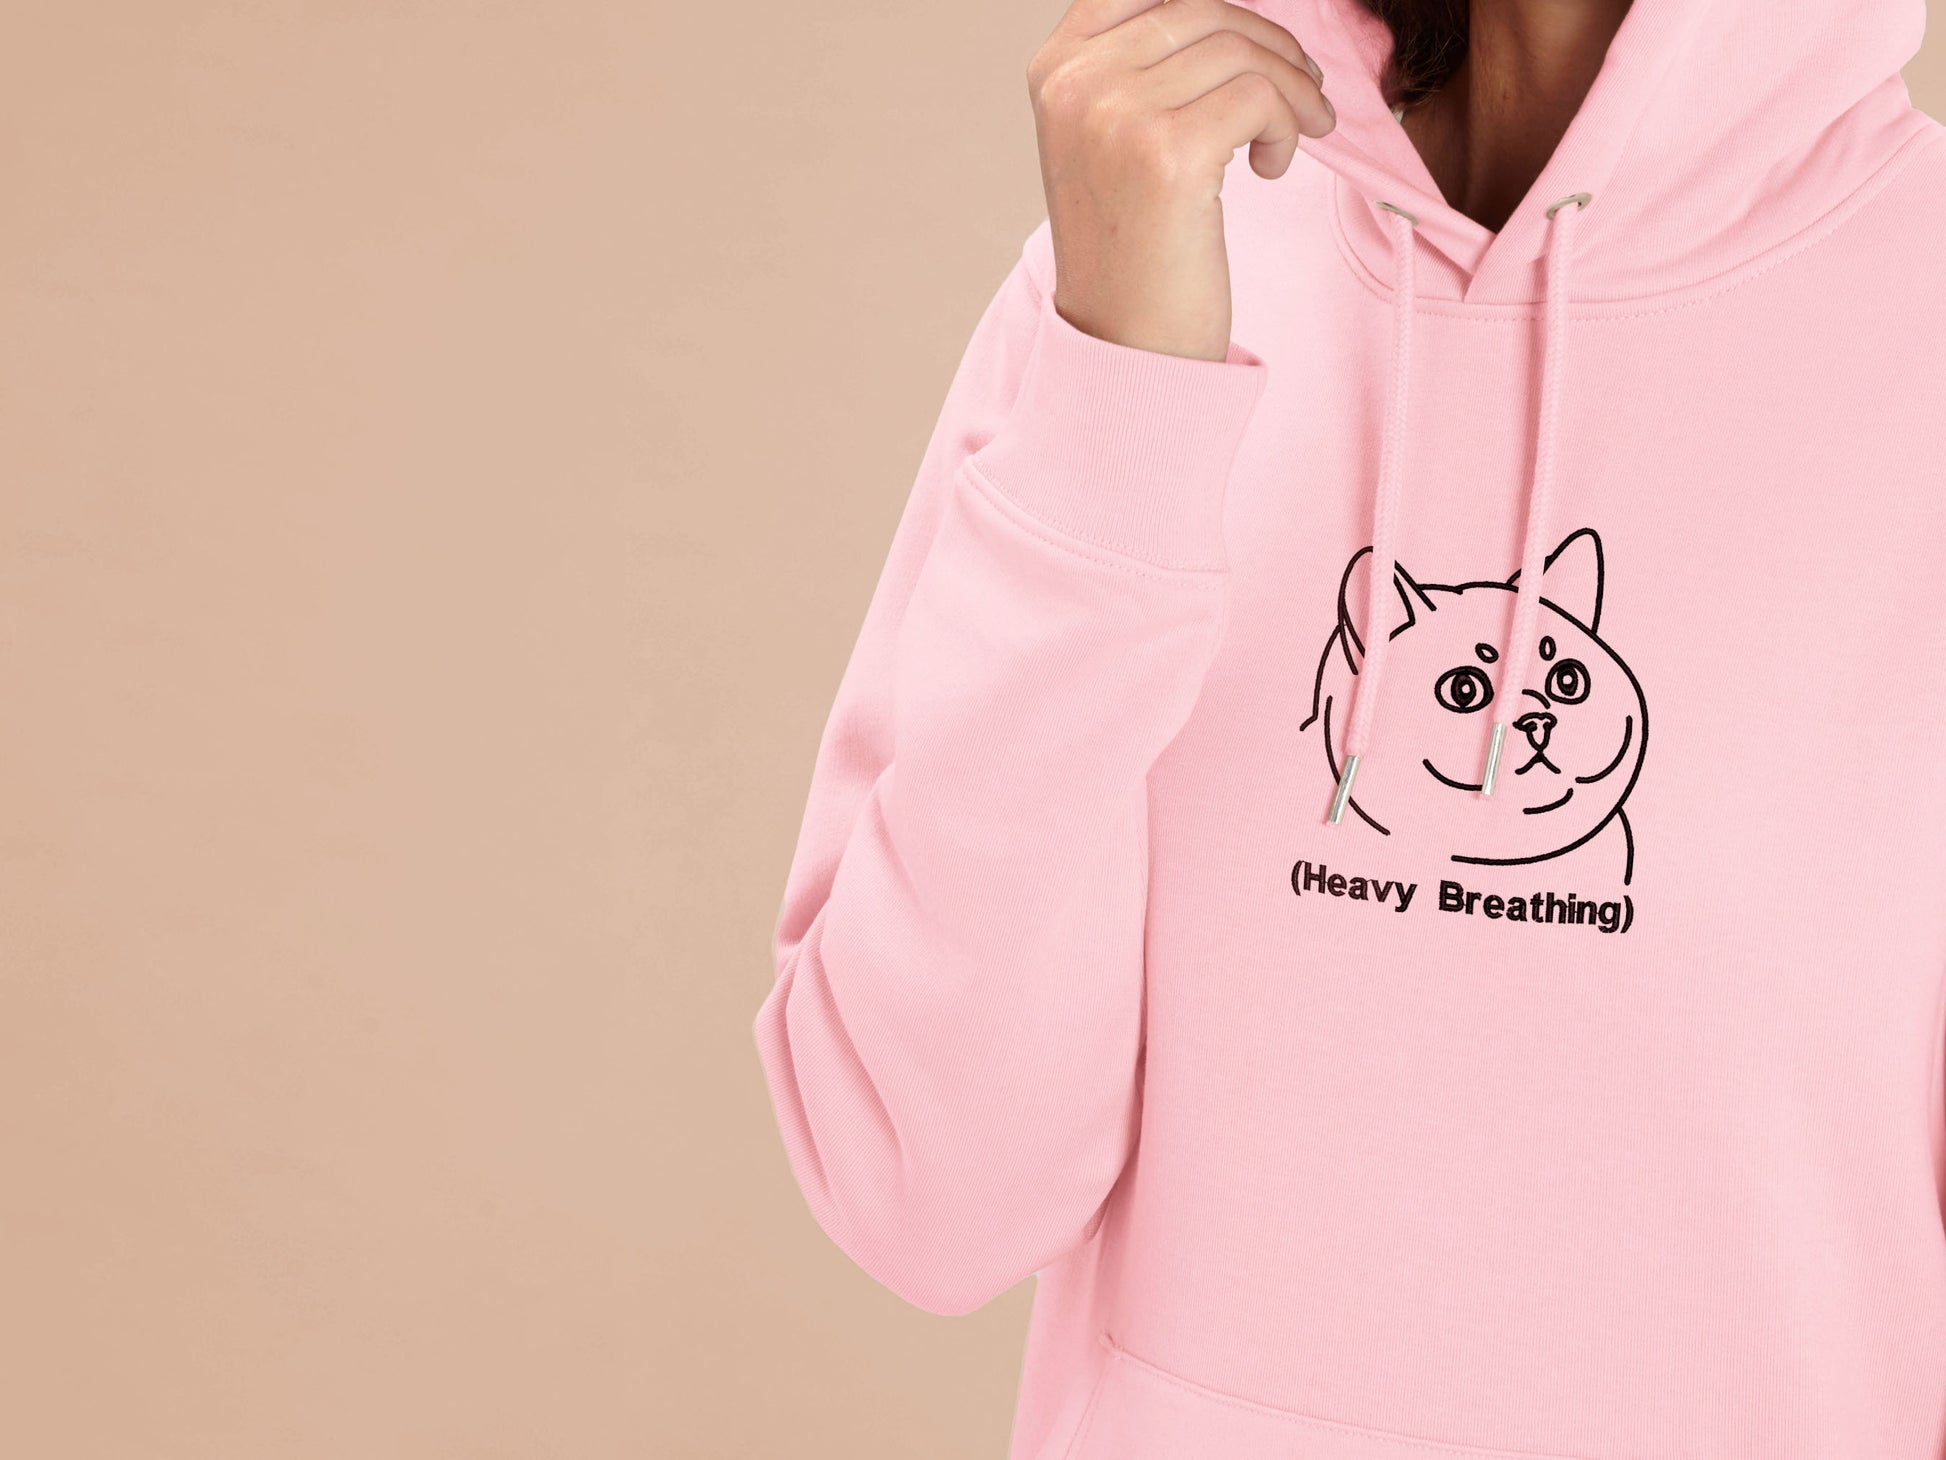 A woman wearing a pink long sleeve fleece hoodie, with an embroidered brown thread design of cute fat cat portrait with text underneath saying (Heavy Breathing)